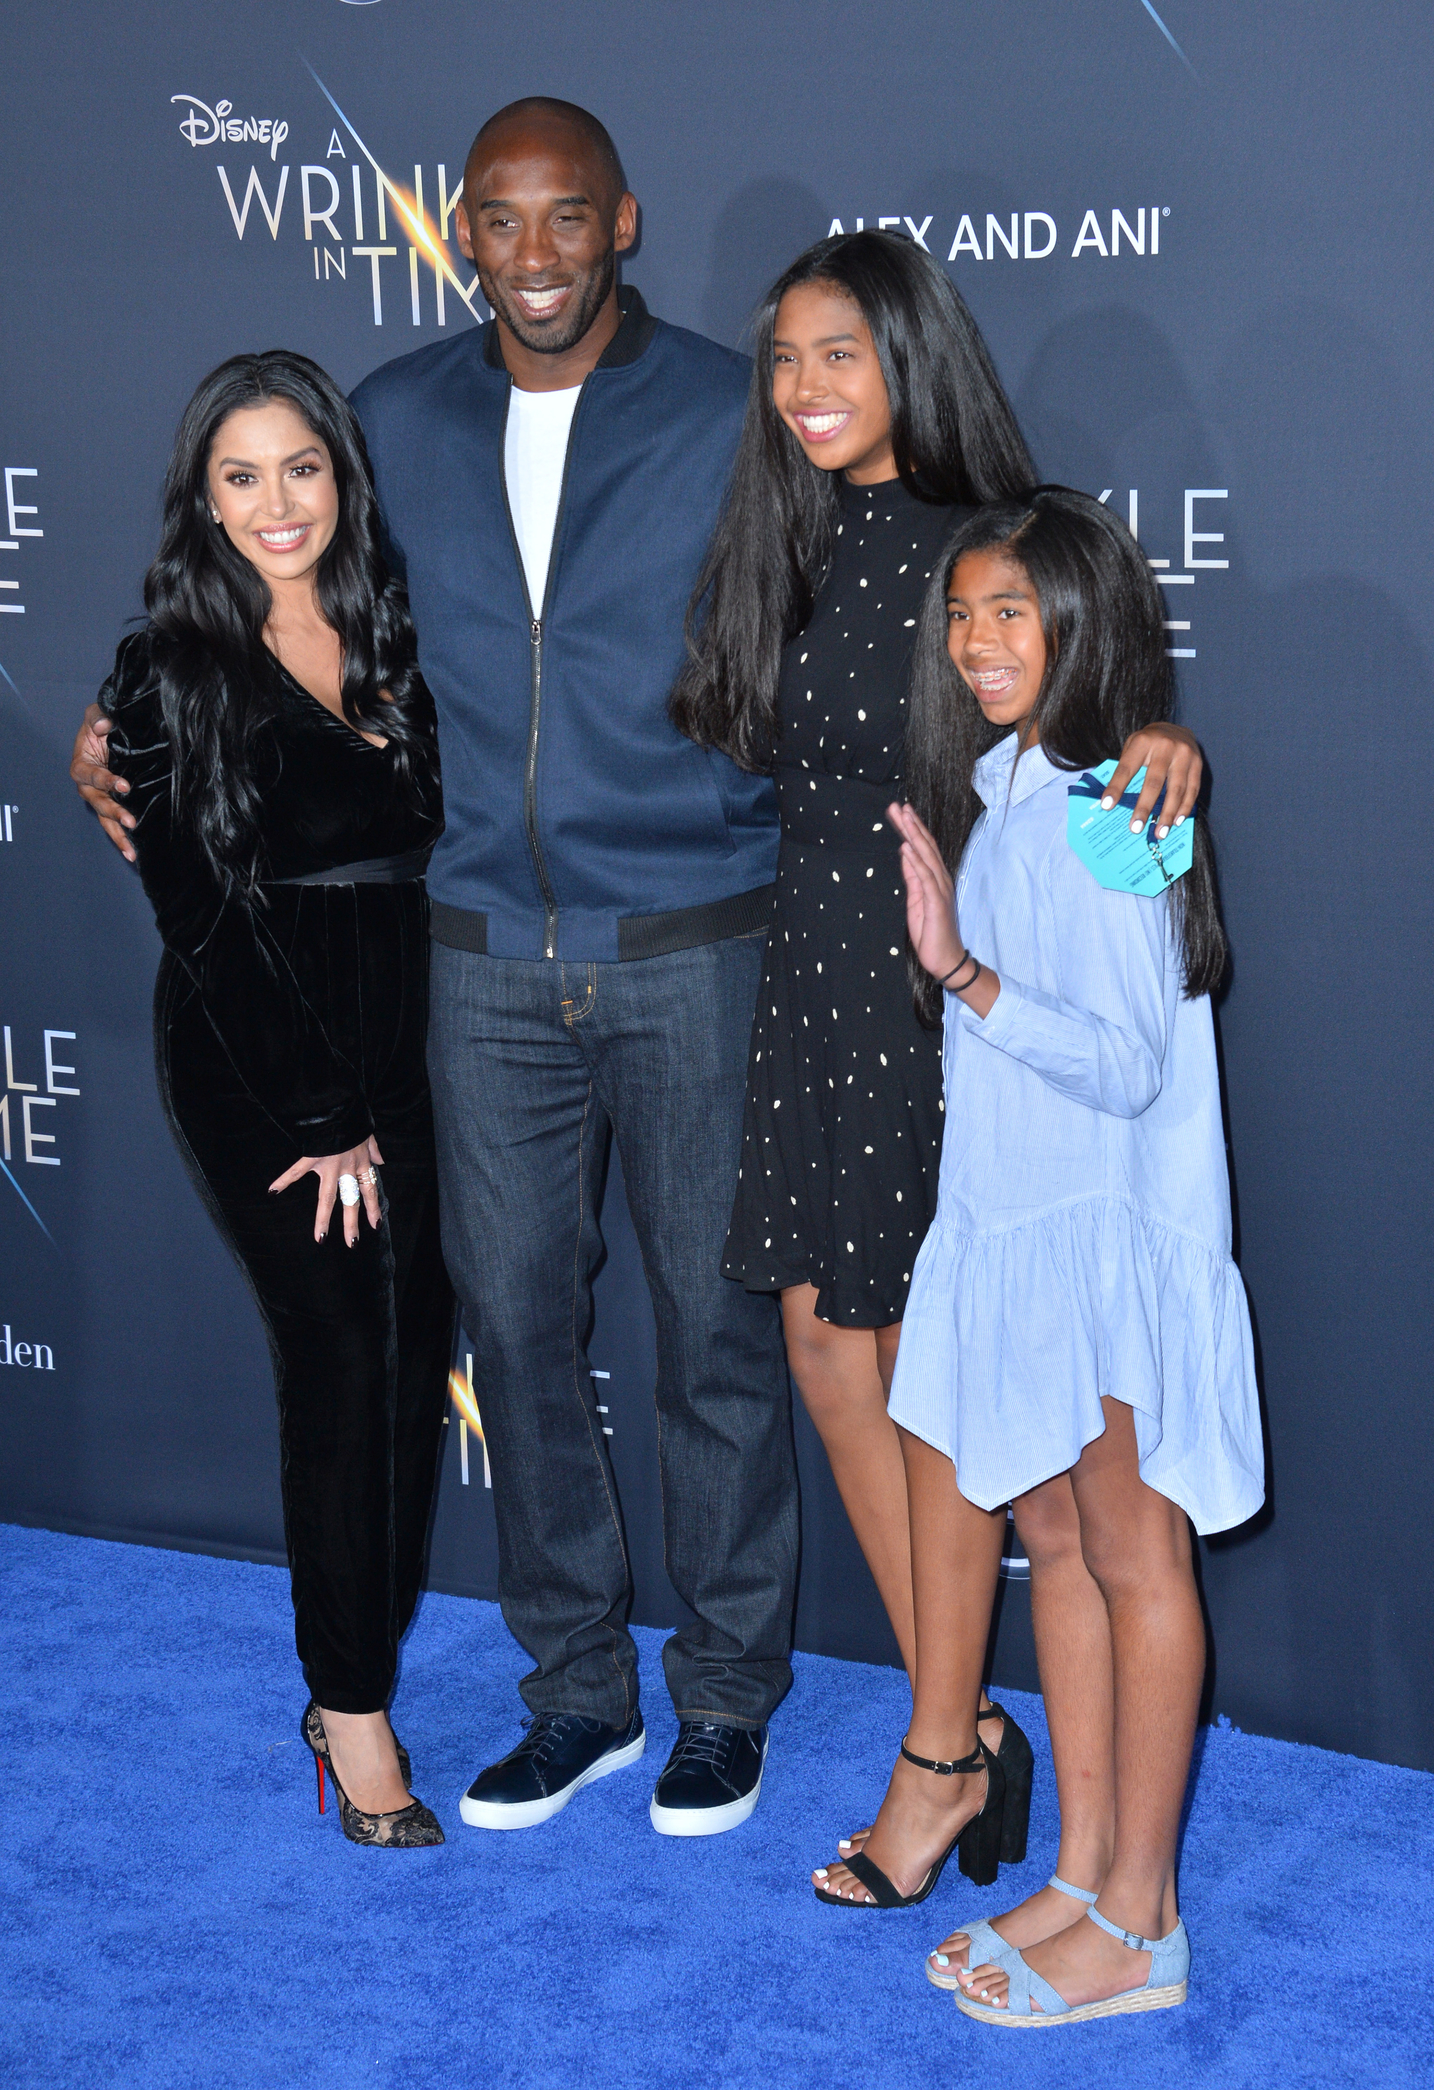 LOS ANGELES, CA. February 26, 2018: Kobe Bryant, Vanessa Laine Bryant &amp; Children at the premiere for &quot;A Wrinkle in Time&quot; at the El Capitan Theatre.
© 2018 Paul Smith/Featureflash